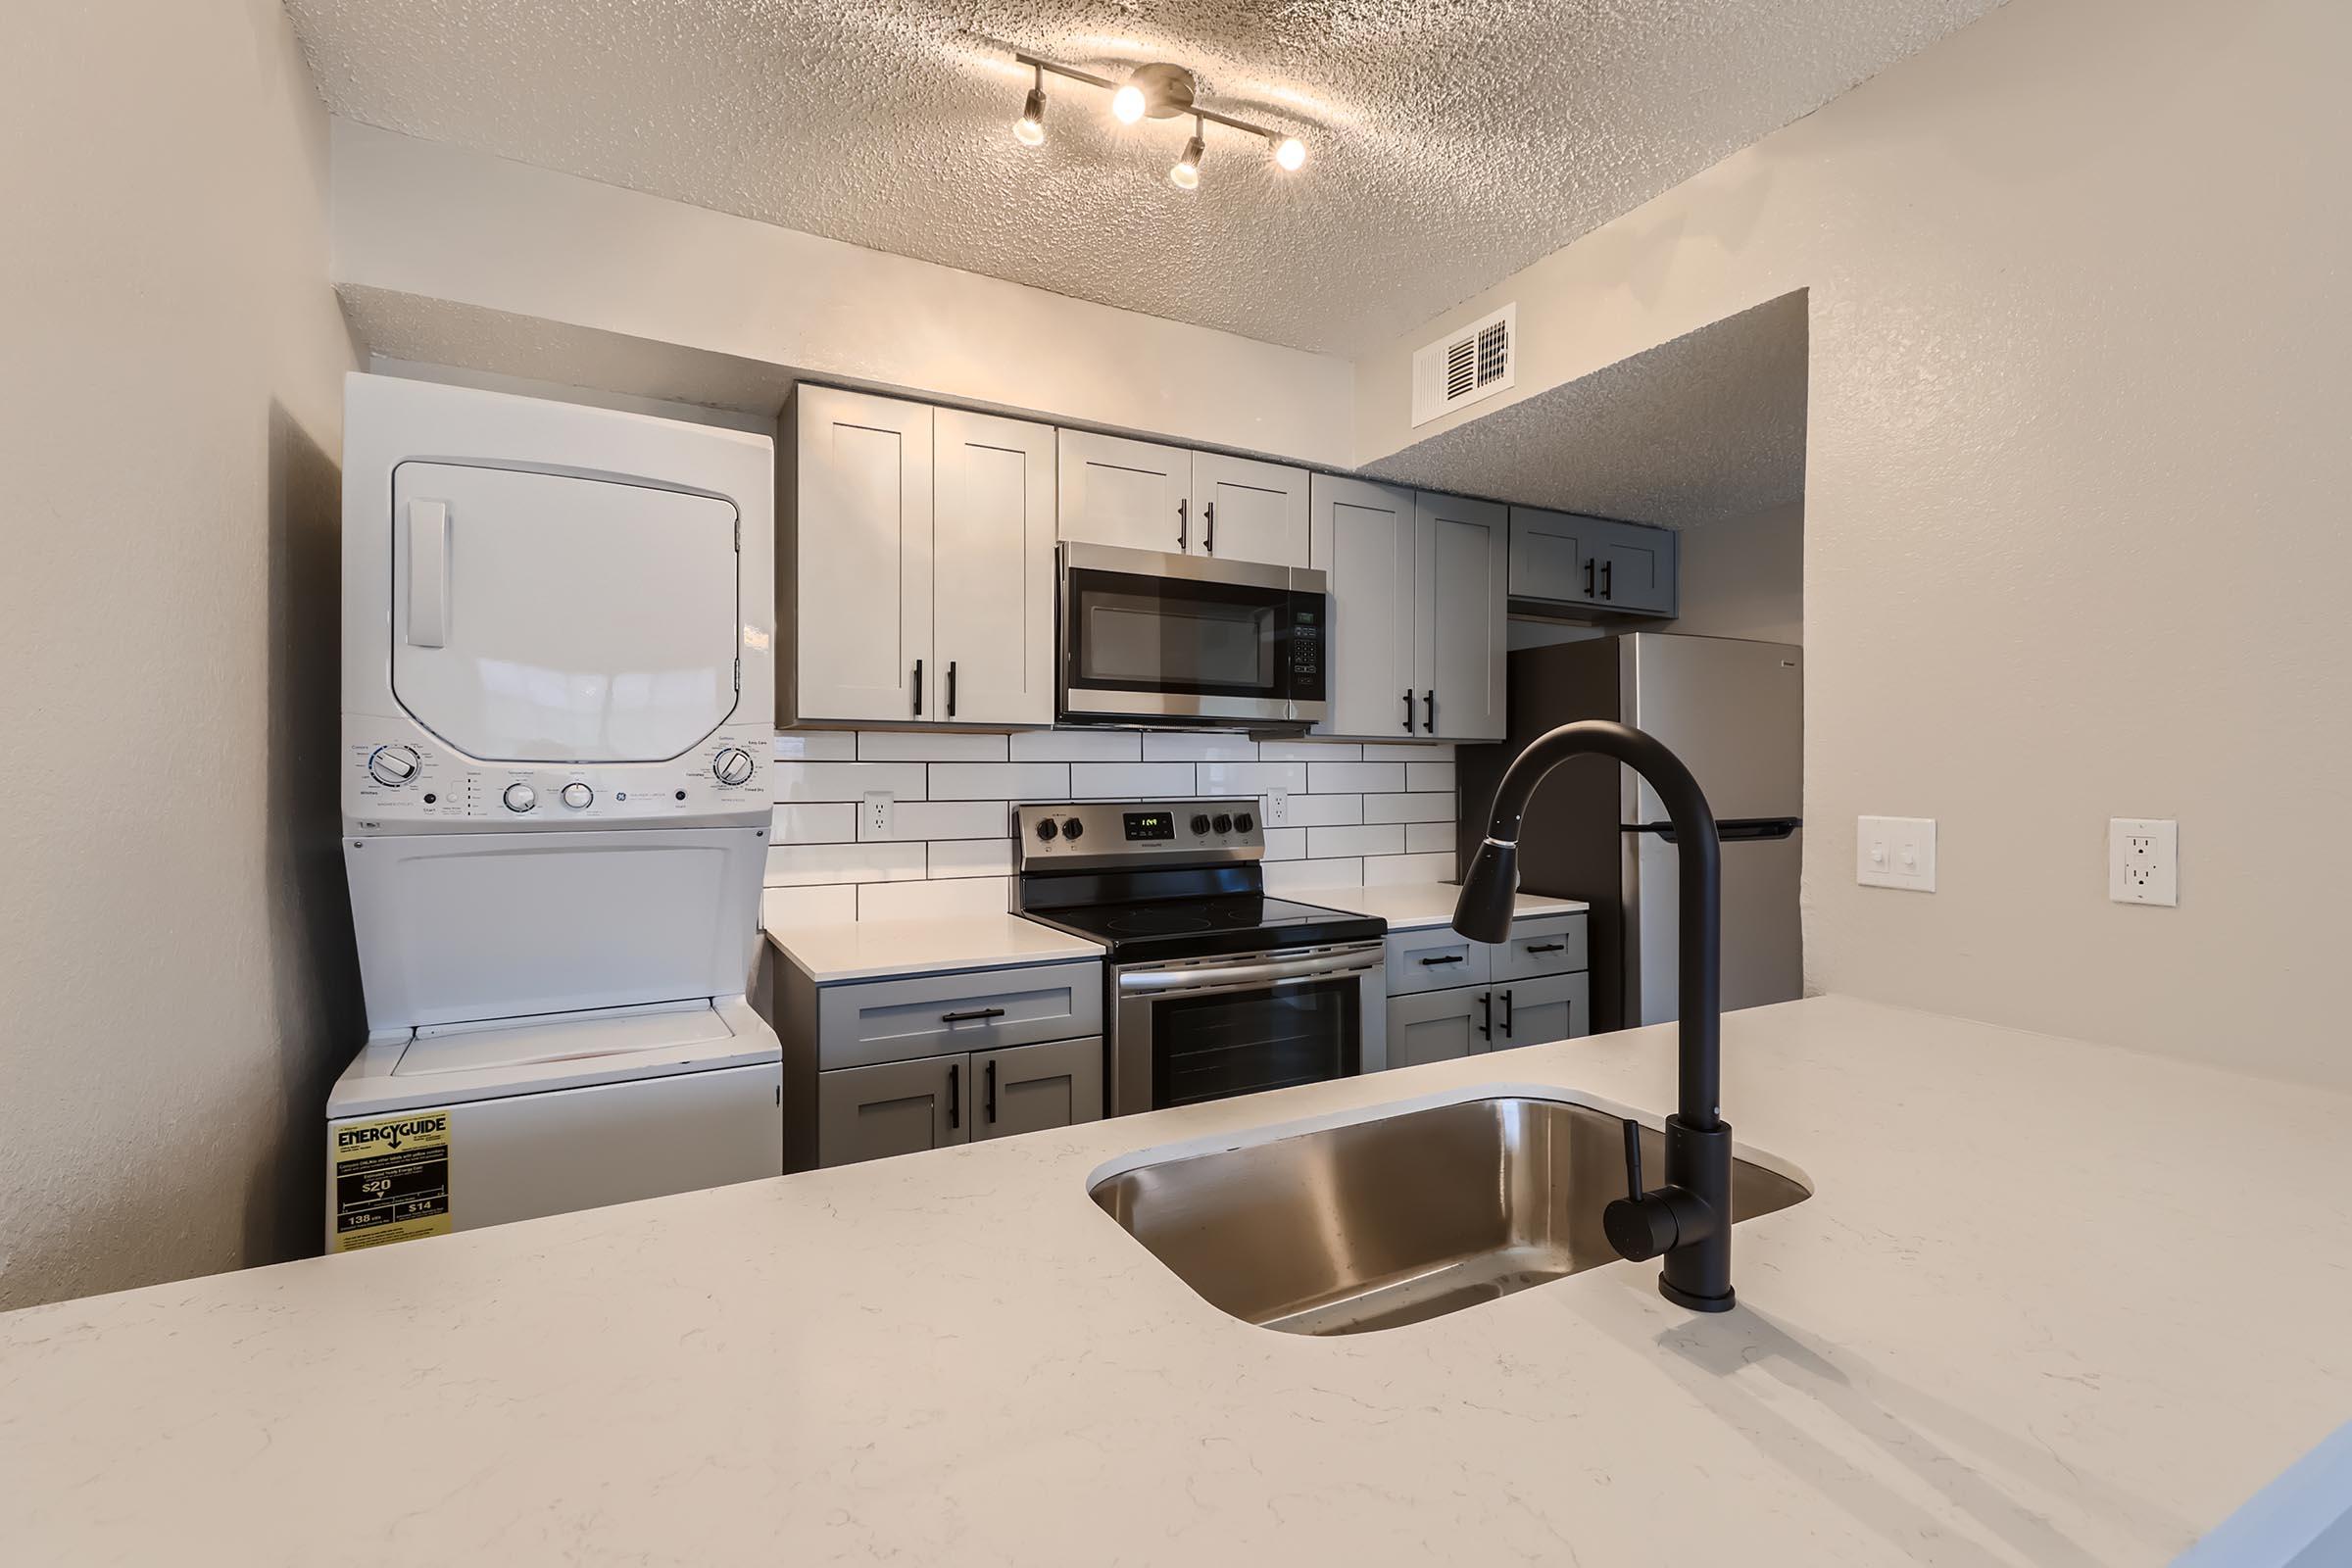 A kitchen with a washer and dryer, shaker cabinets, and stainless steel appliances.